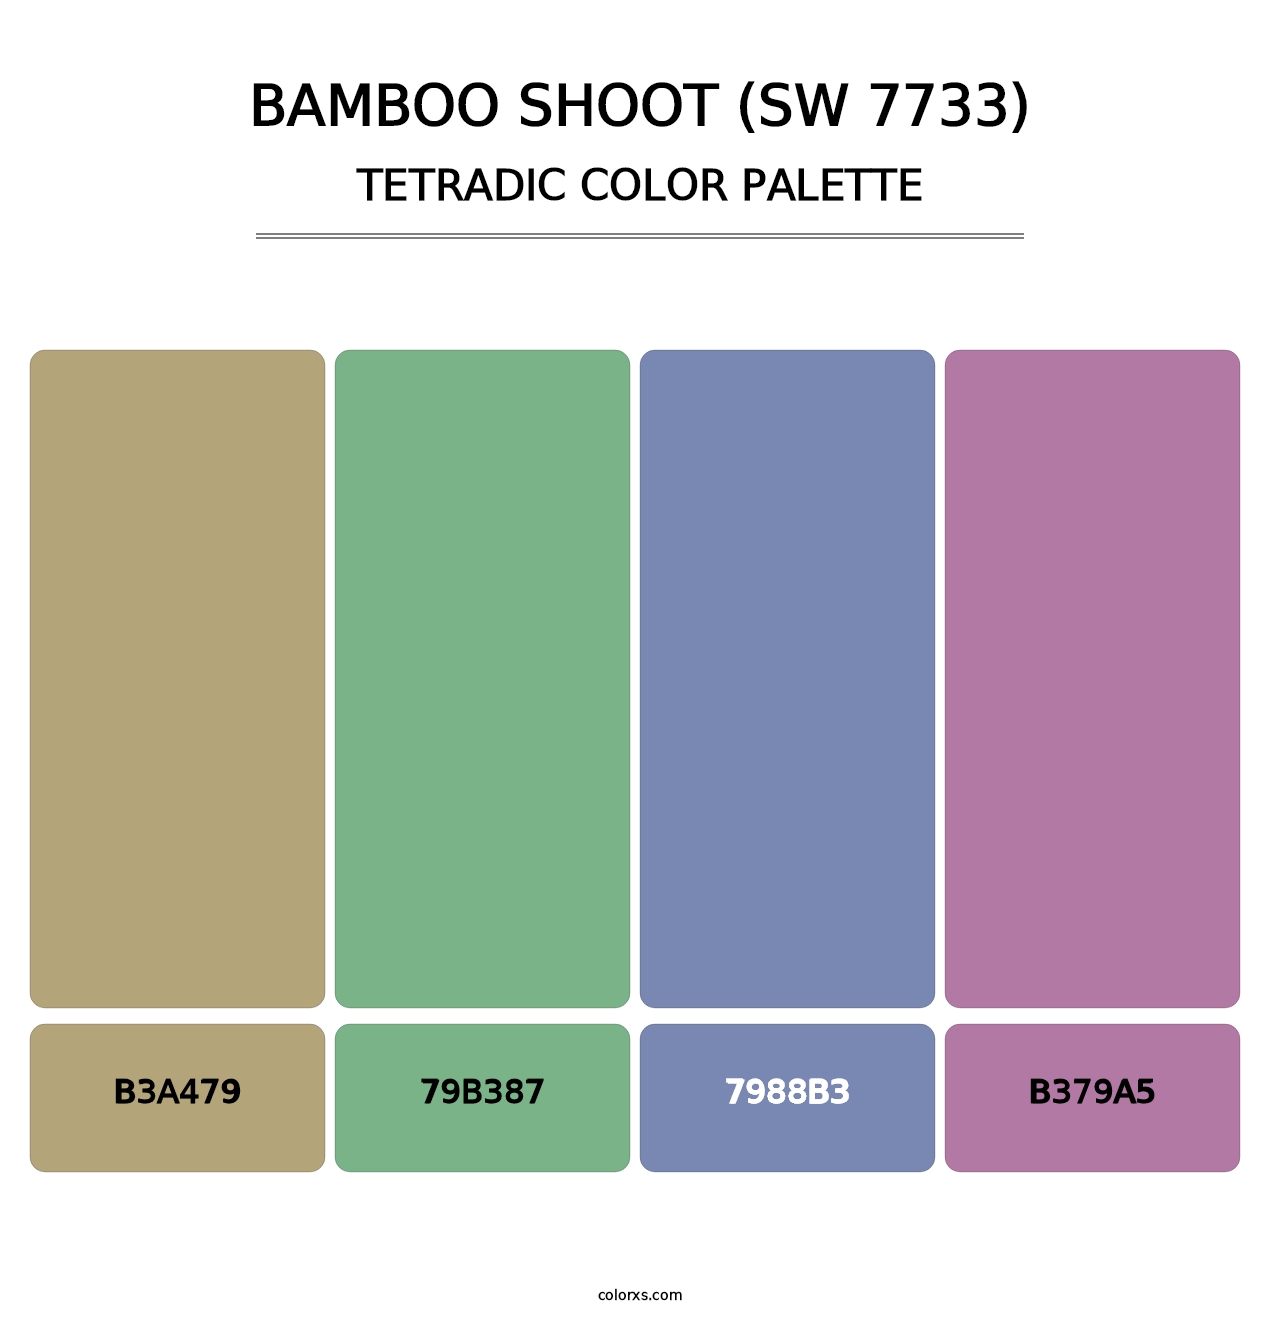 Bamboo Shoot (SW 7733) - Tetradic Color Palette